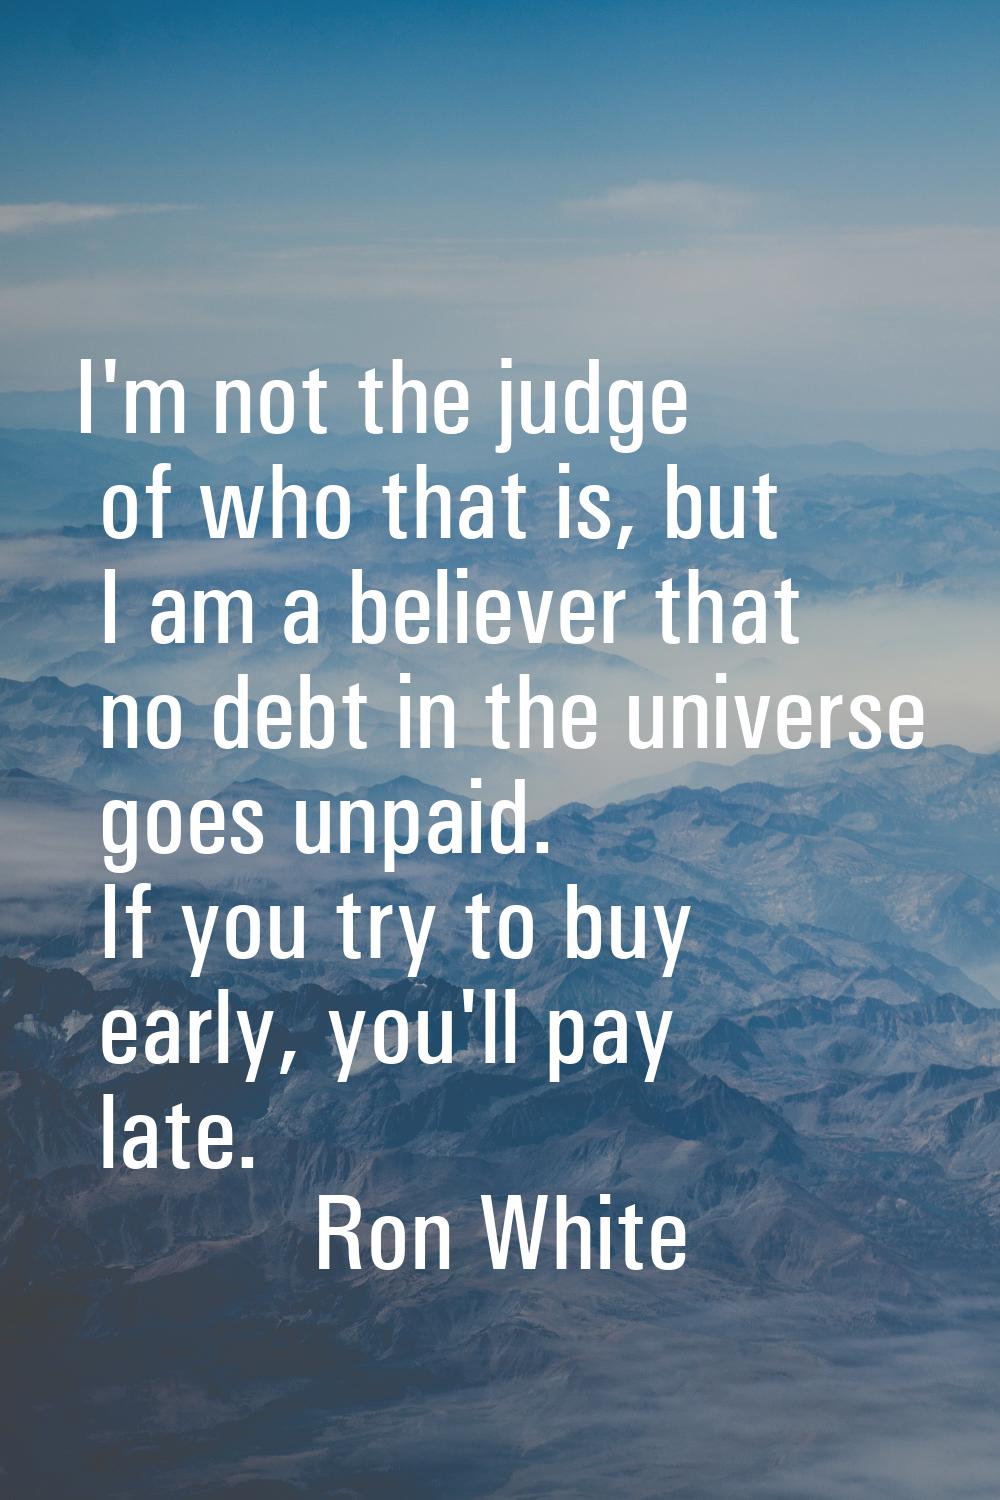 I'm not the judge of who that is, but I am a believer that no debt in the universe goes unpaid. If 